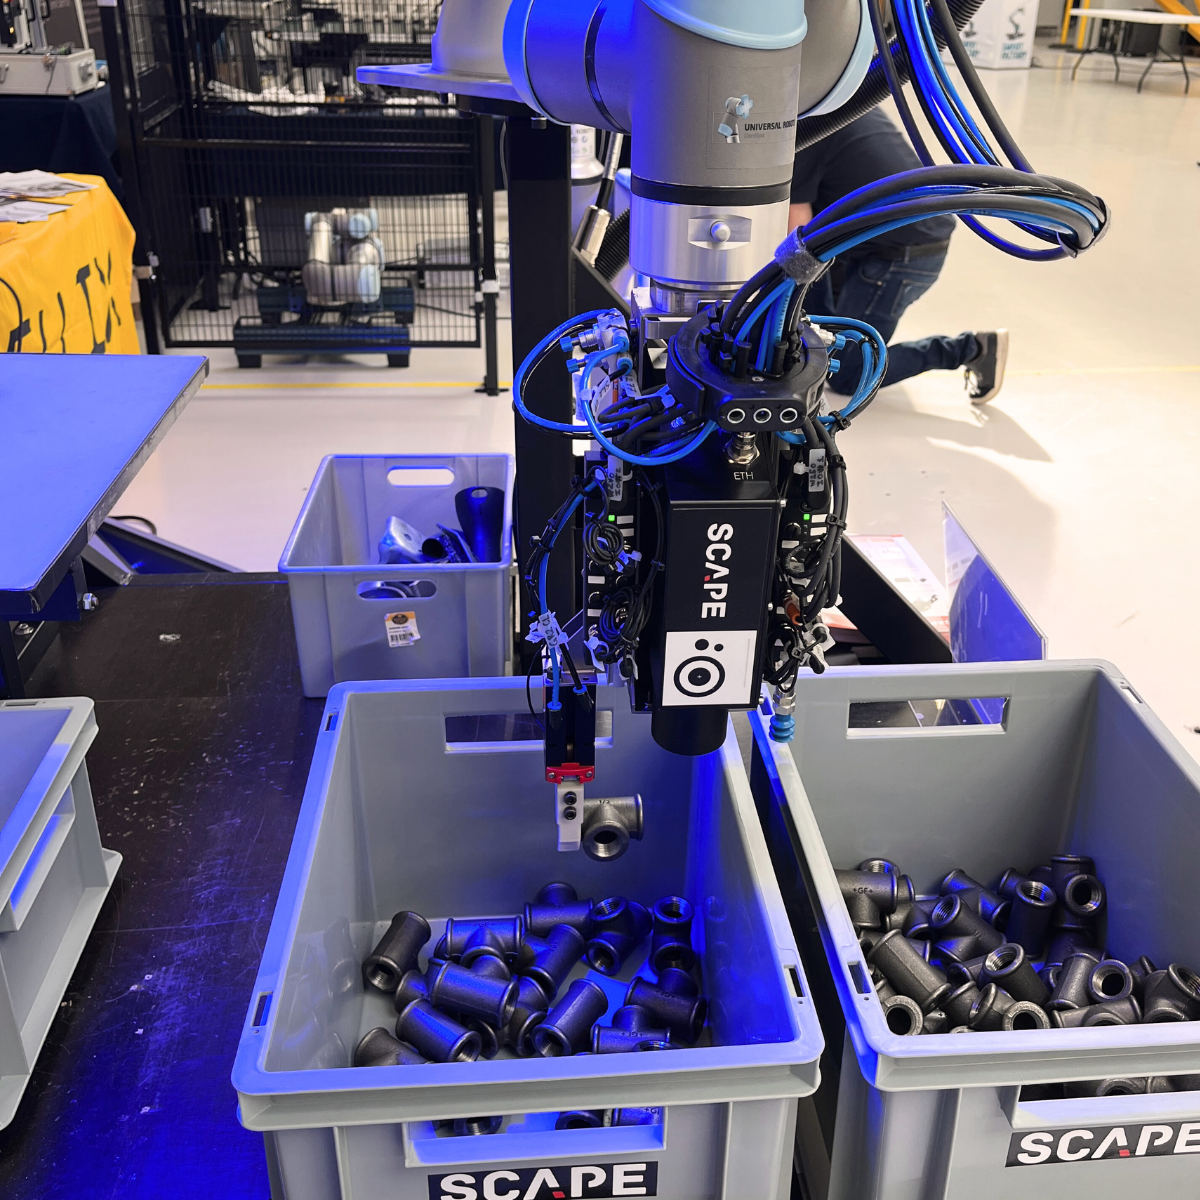 Scape Mini-Picker, ultimate guide to bin-picking for manufacturing automation